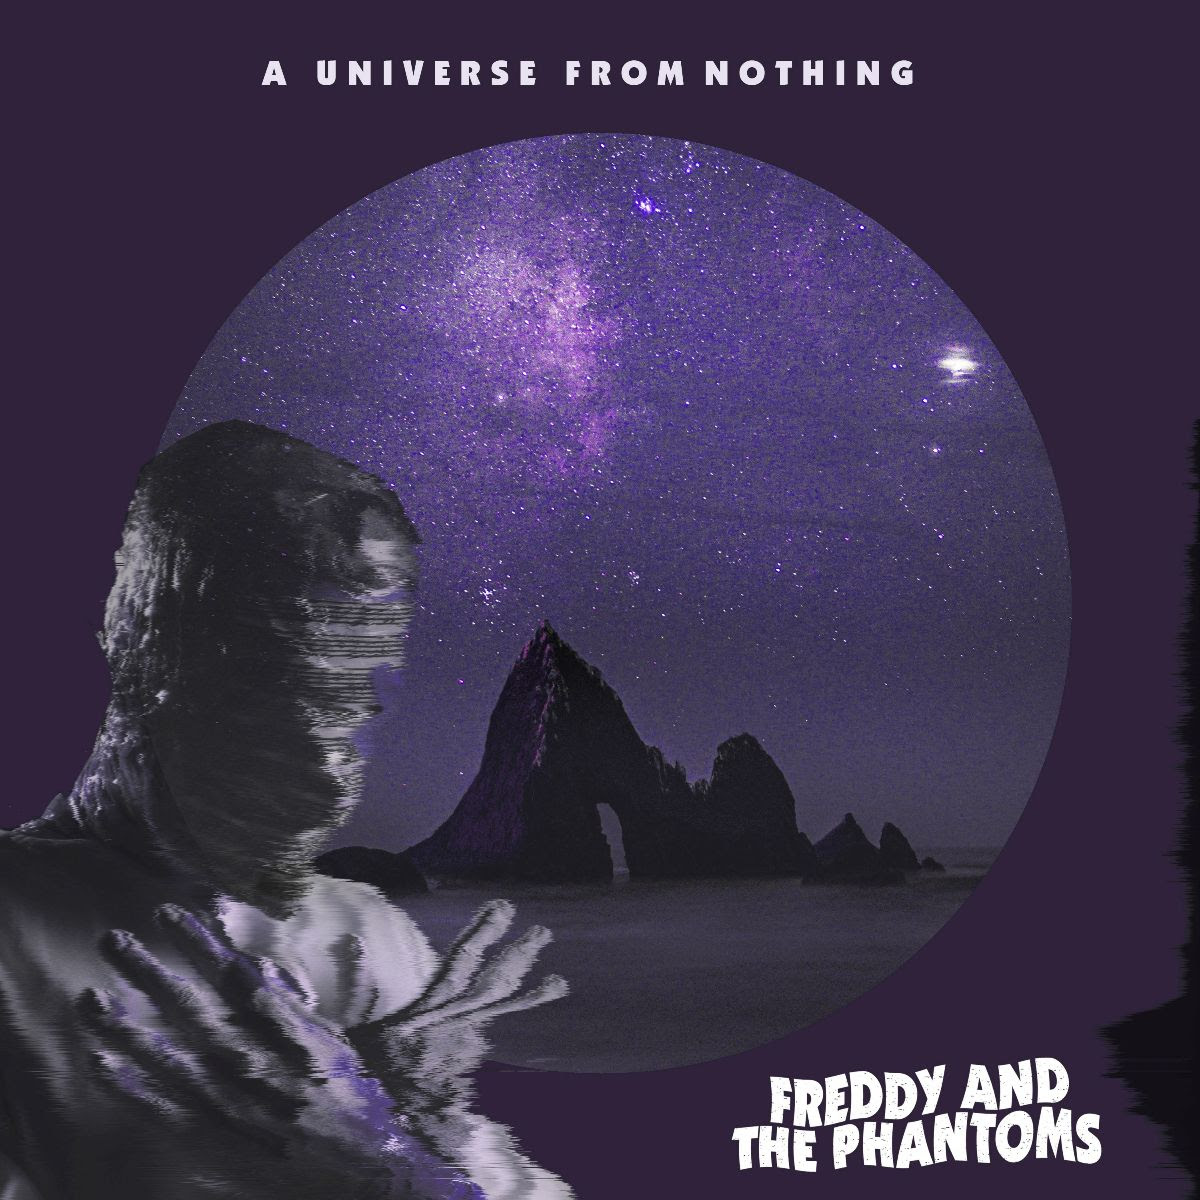 Freddy and the Phantoms: A Universe From Nothing